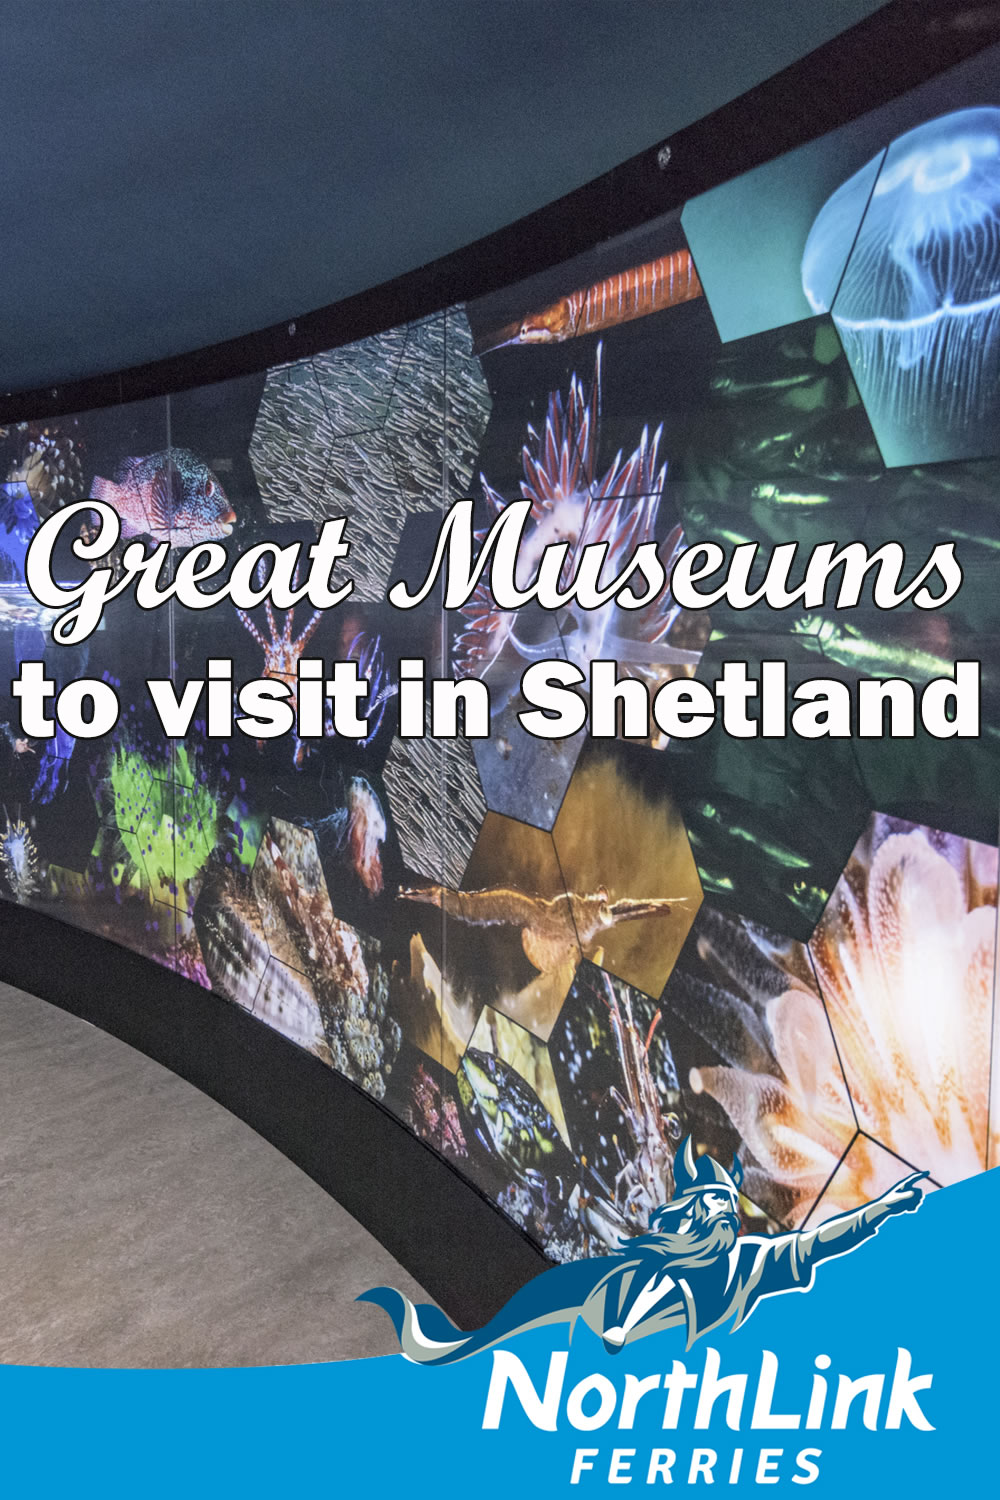 Great Museums to visit in Shetland